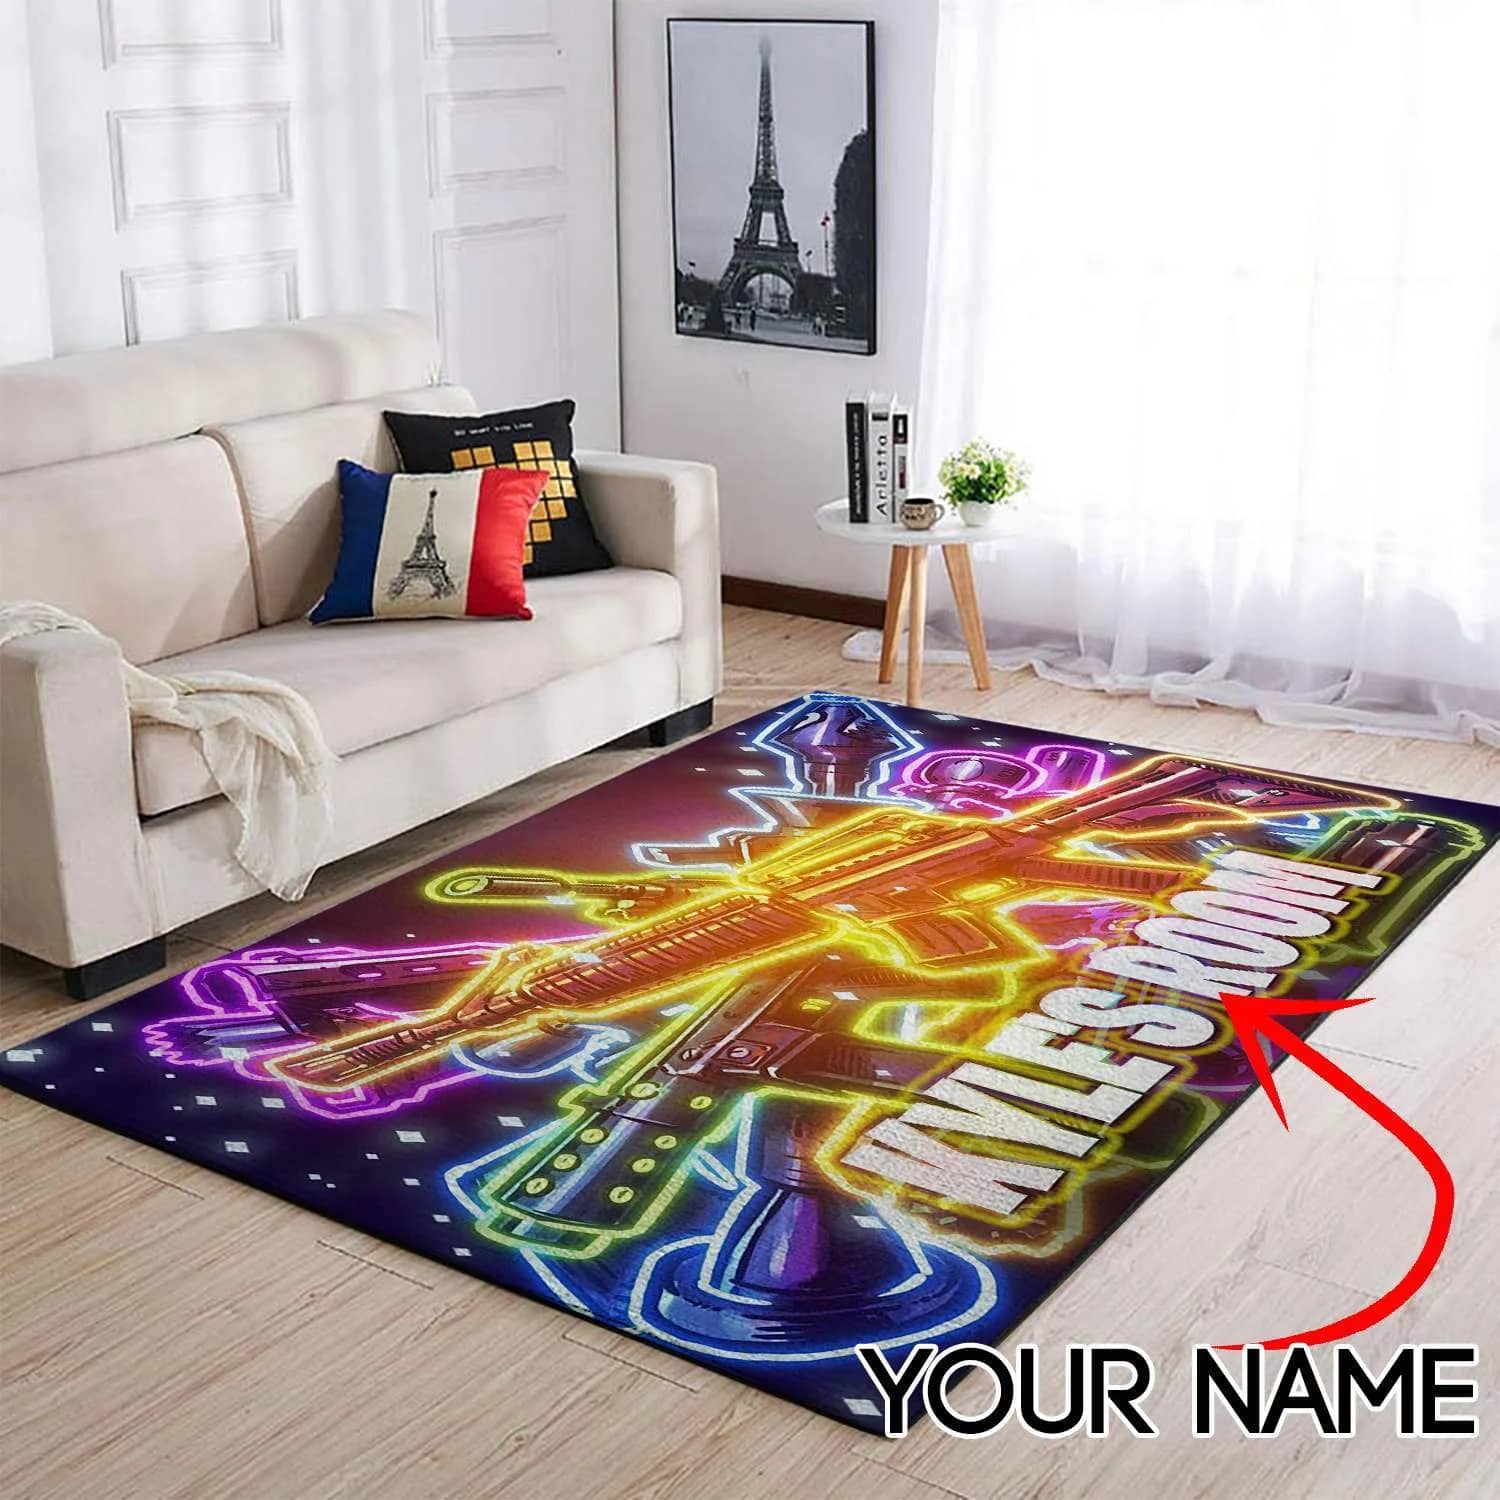 Customized Name Fortnite Area Limited Edition Amazon Best Seller Sku 266282 Rug